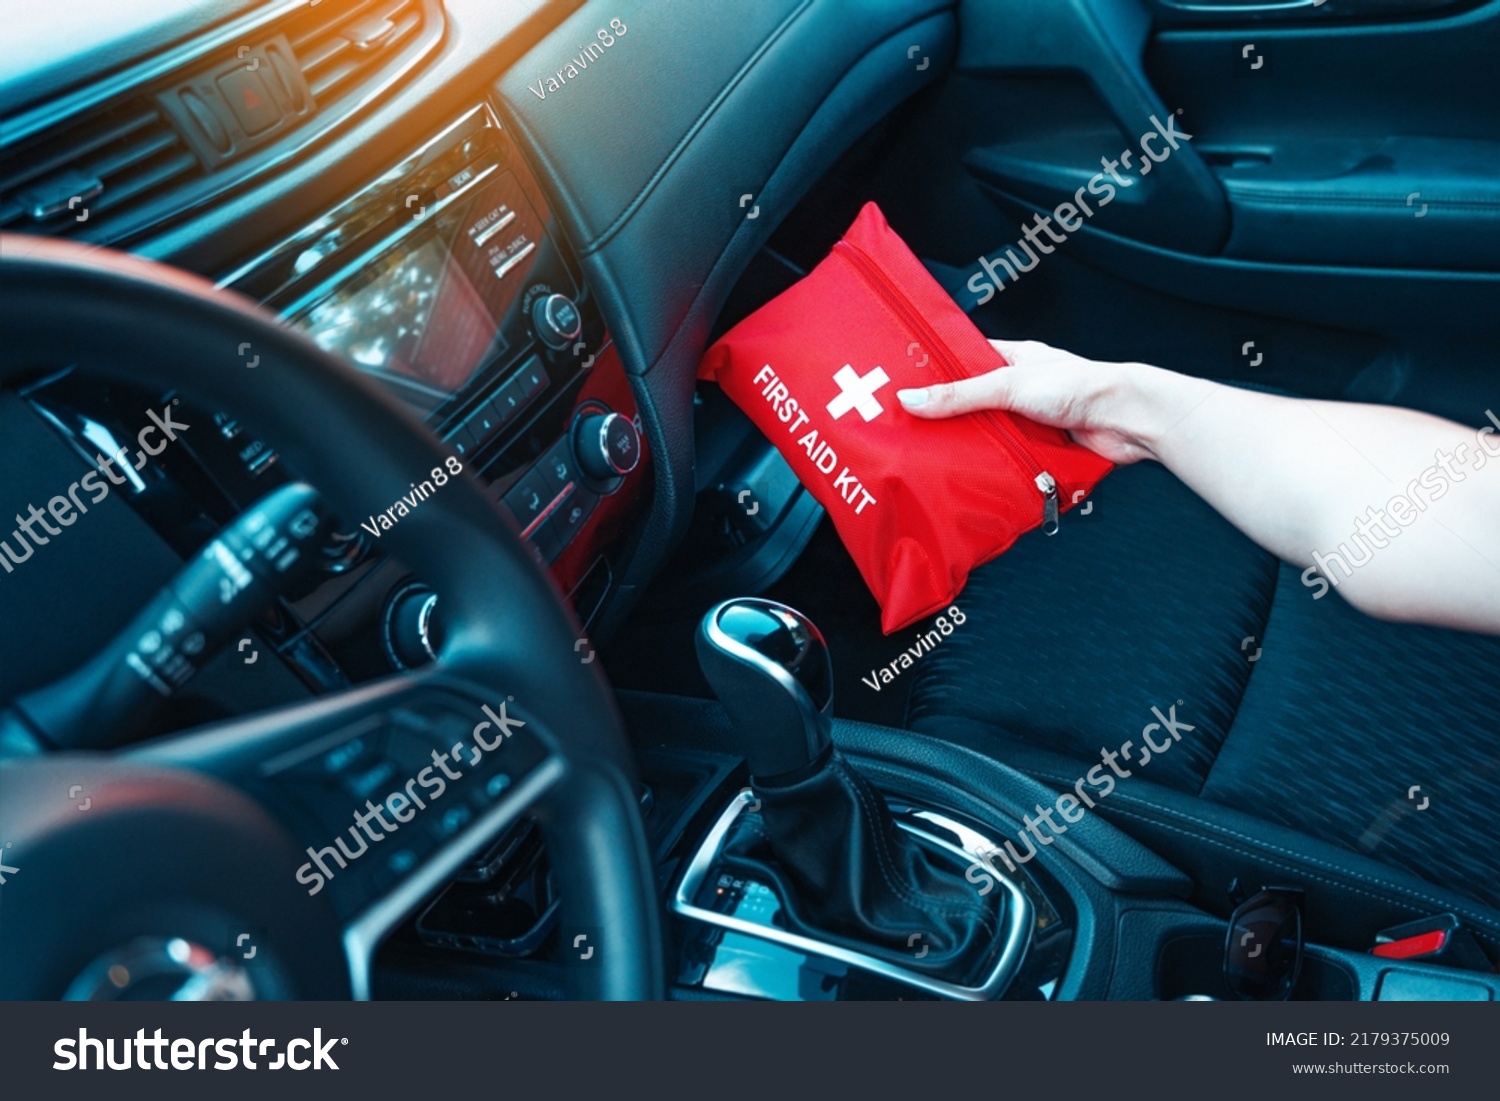 Female hand taking red first aid kit from the car glove box. A well-equipped car for road trips concept. #2179375009